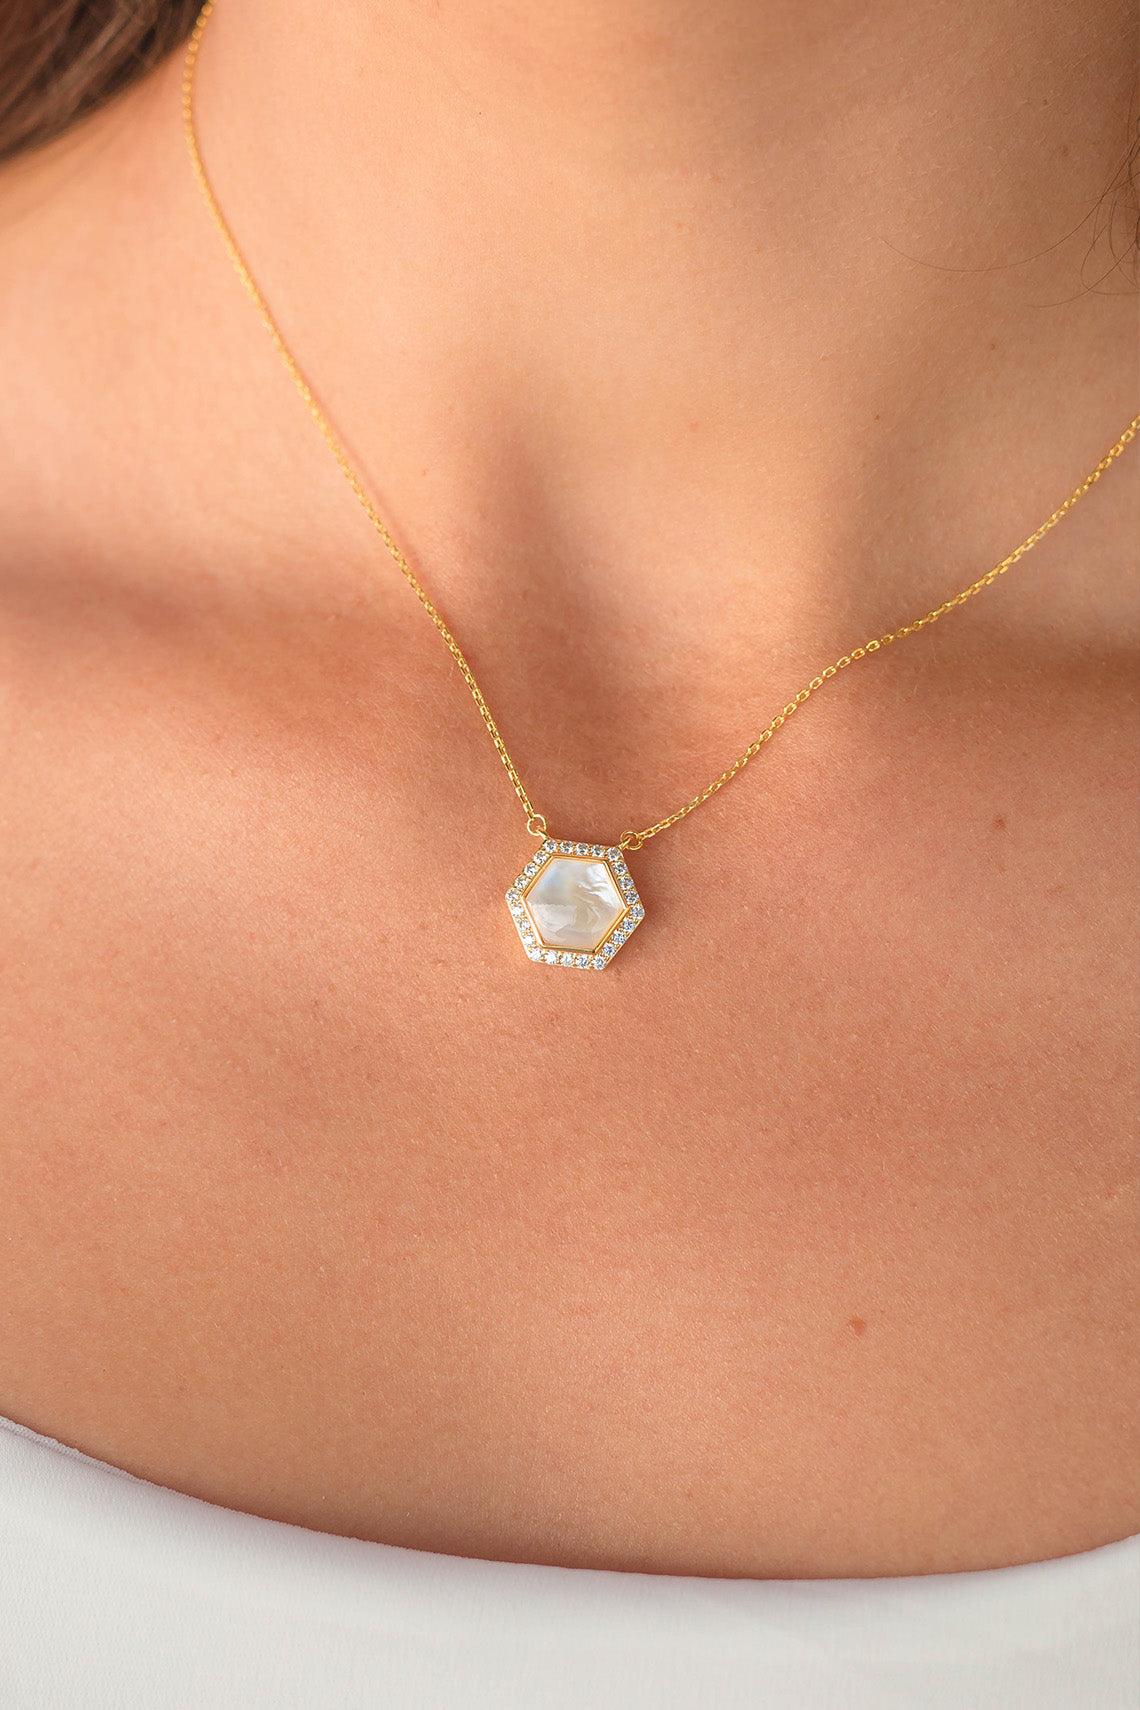 OCEANS TORQUAY MOTHER OF PEARL NECKLACE GOLD